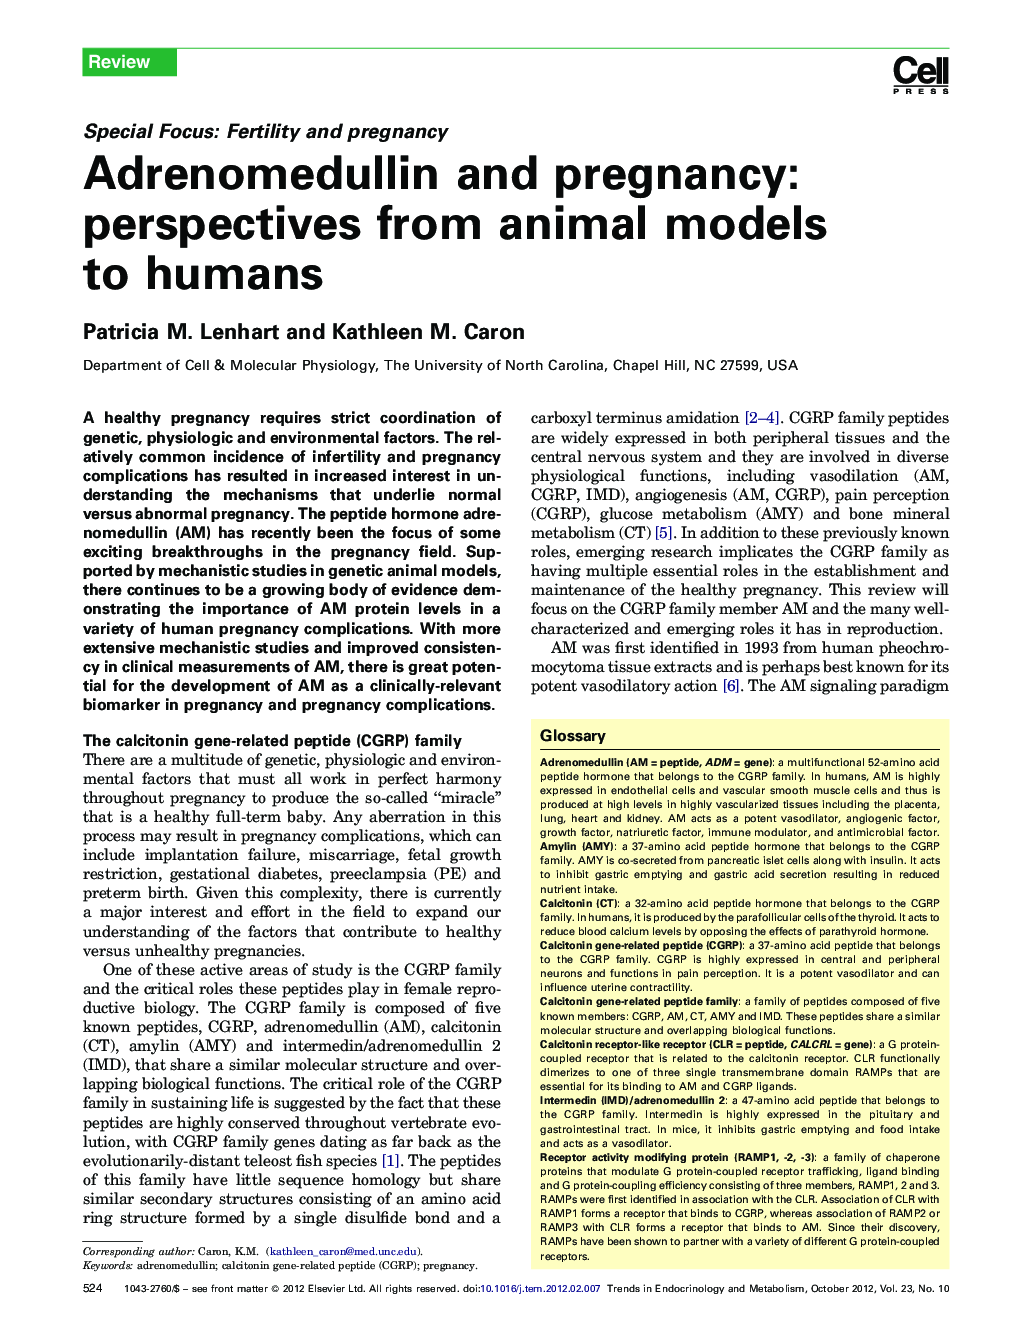 Adrenomedullin and pregnancy: perspectives from animal models to humans